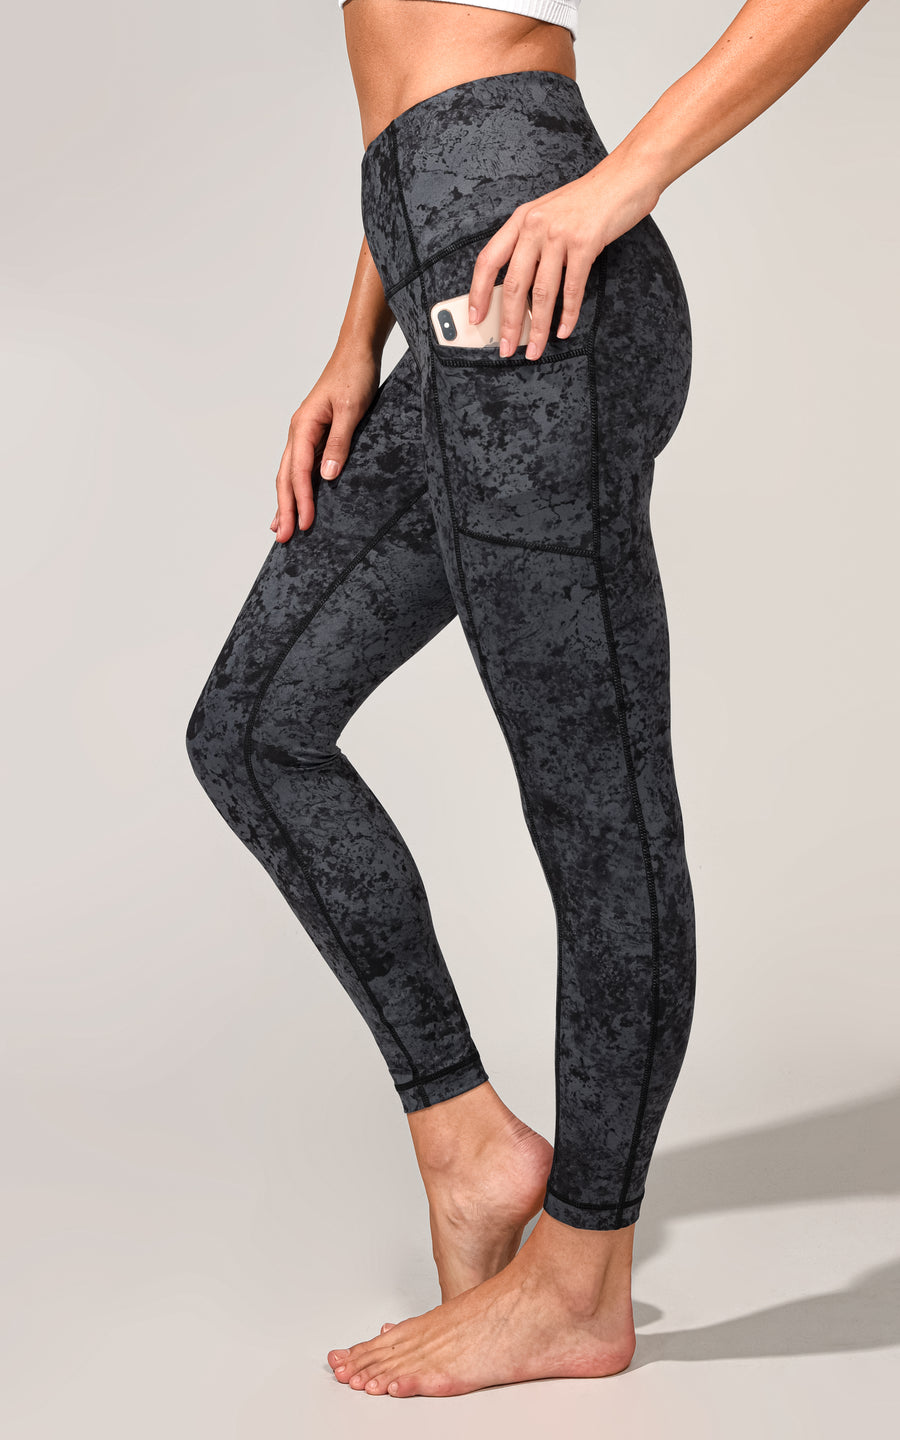 Yogalicious, Pants & Jumpsuits, Yogalicious Lux Joggers Side Zip Pockets  Size Small Cuffed Ankles